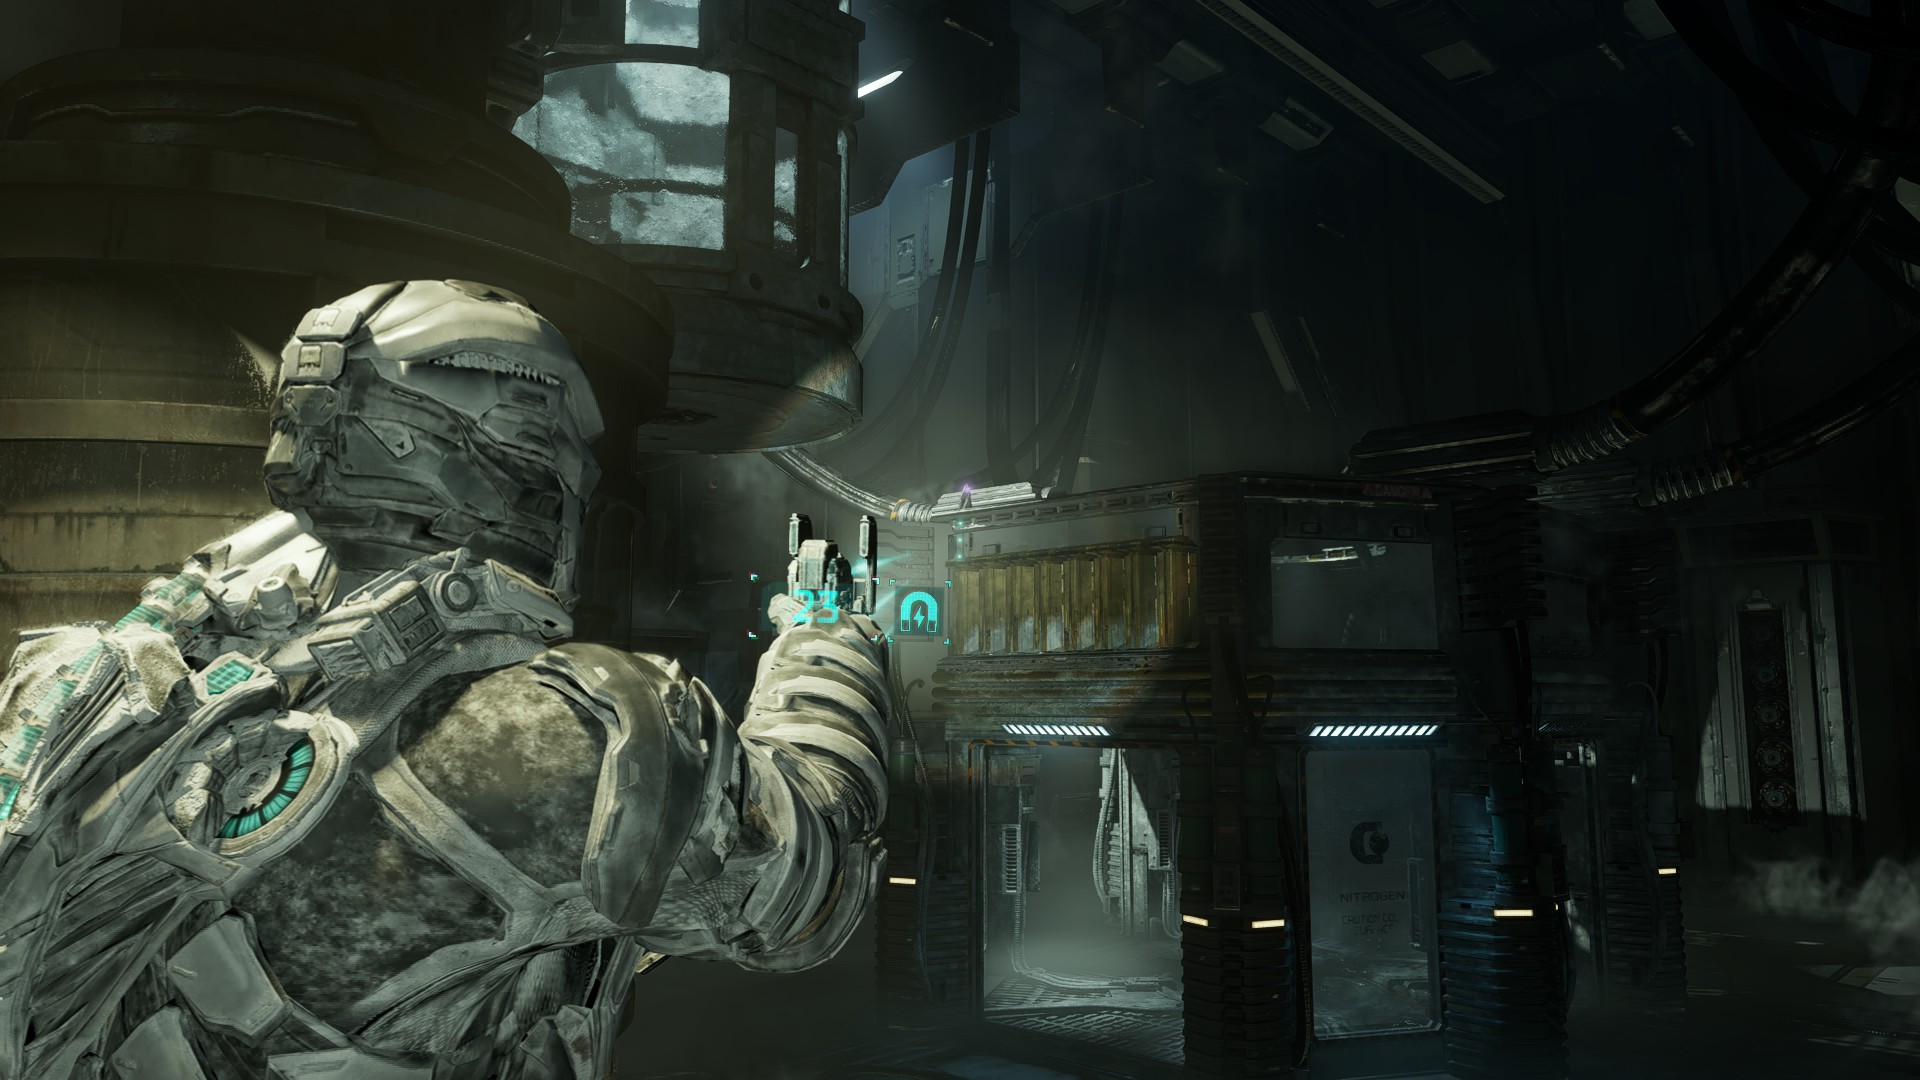 Dead Space Marker Fragment in the Cryo chamber